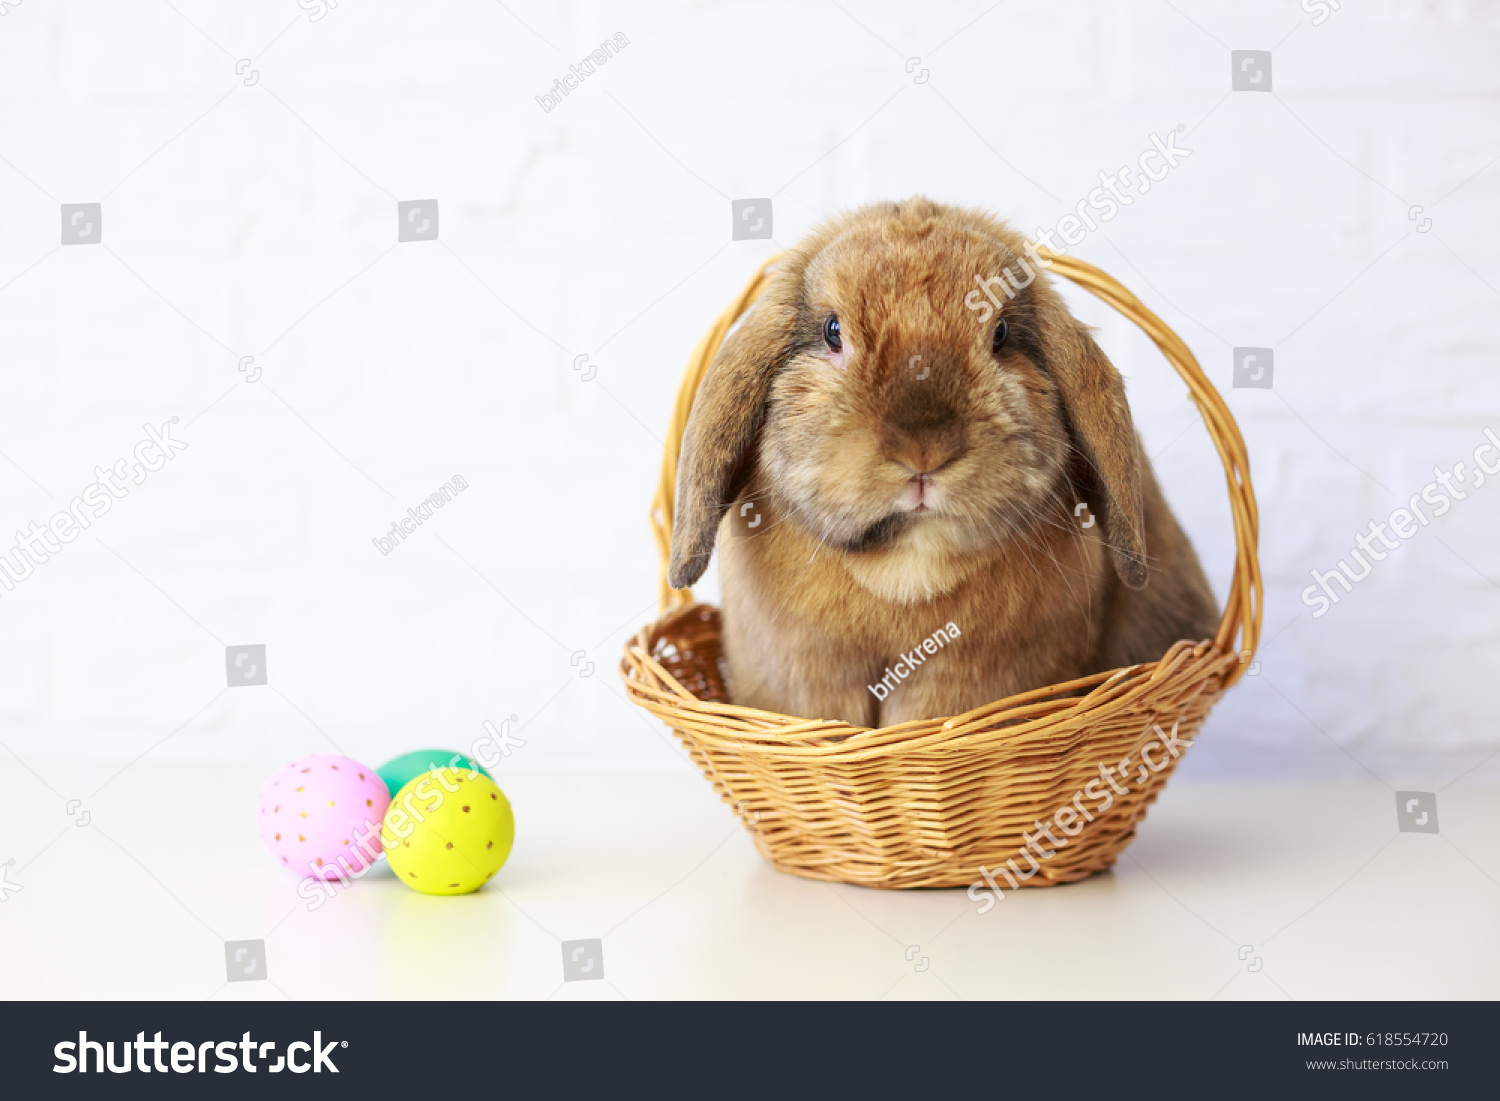 Easter Bunny in Basket with Easter Eggs. White Brick Wall Background. Shallow Depth of Field. Fluffy Brown Lop-Eared Rabbit. Copy Space. #618554720